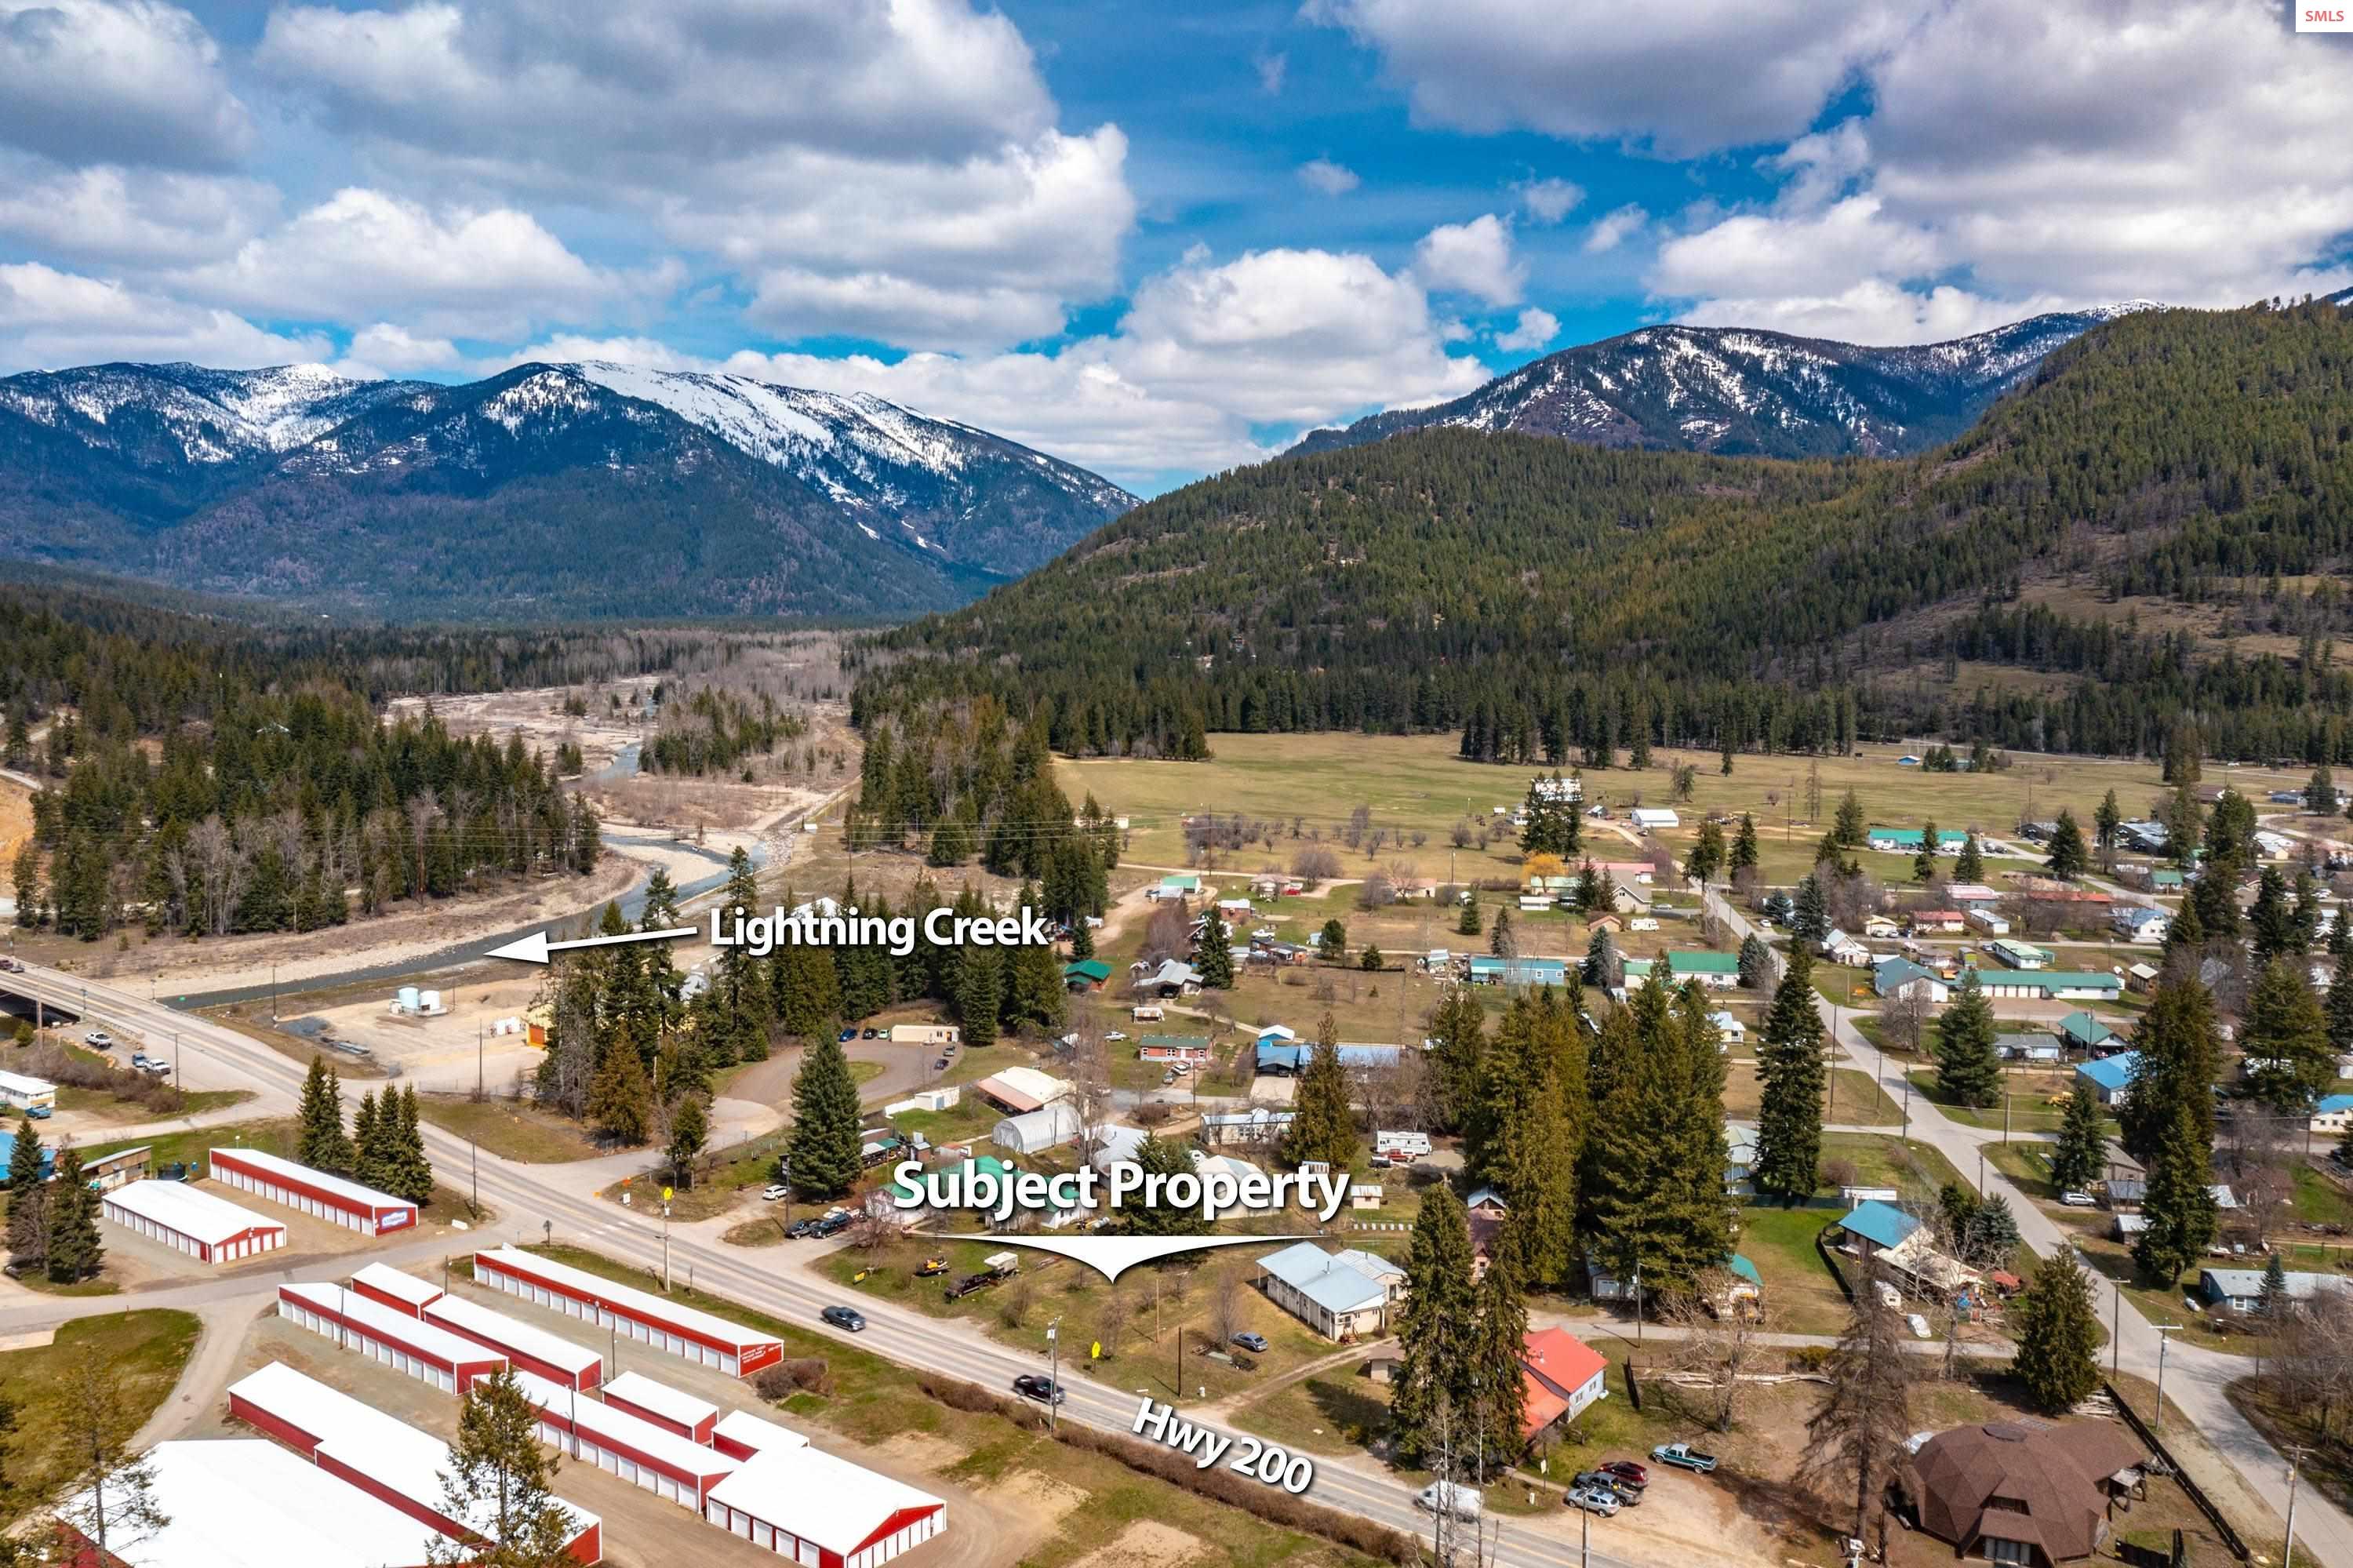 400 W 4th Ave. (Highway 200), Clark Fork, ID 83811